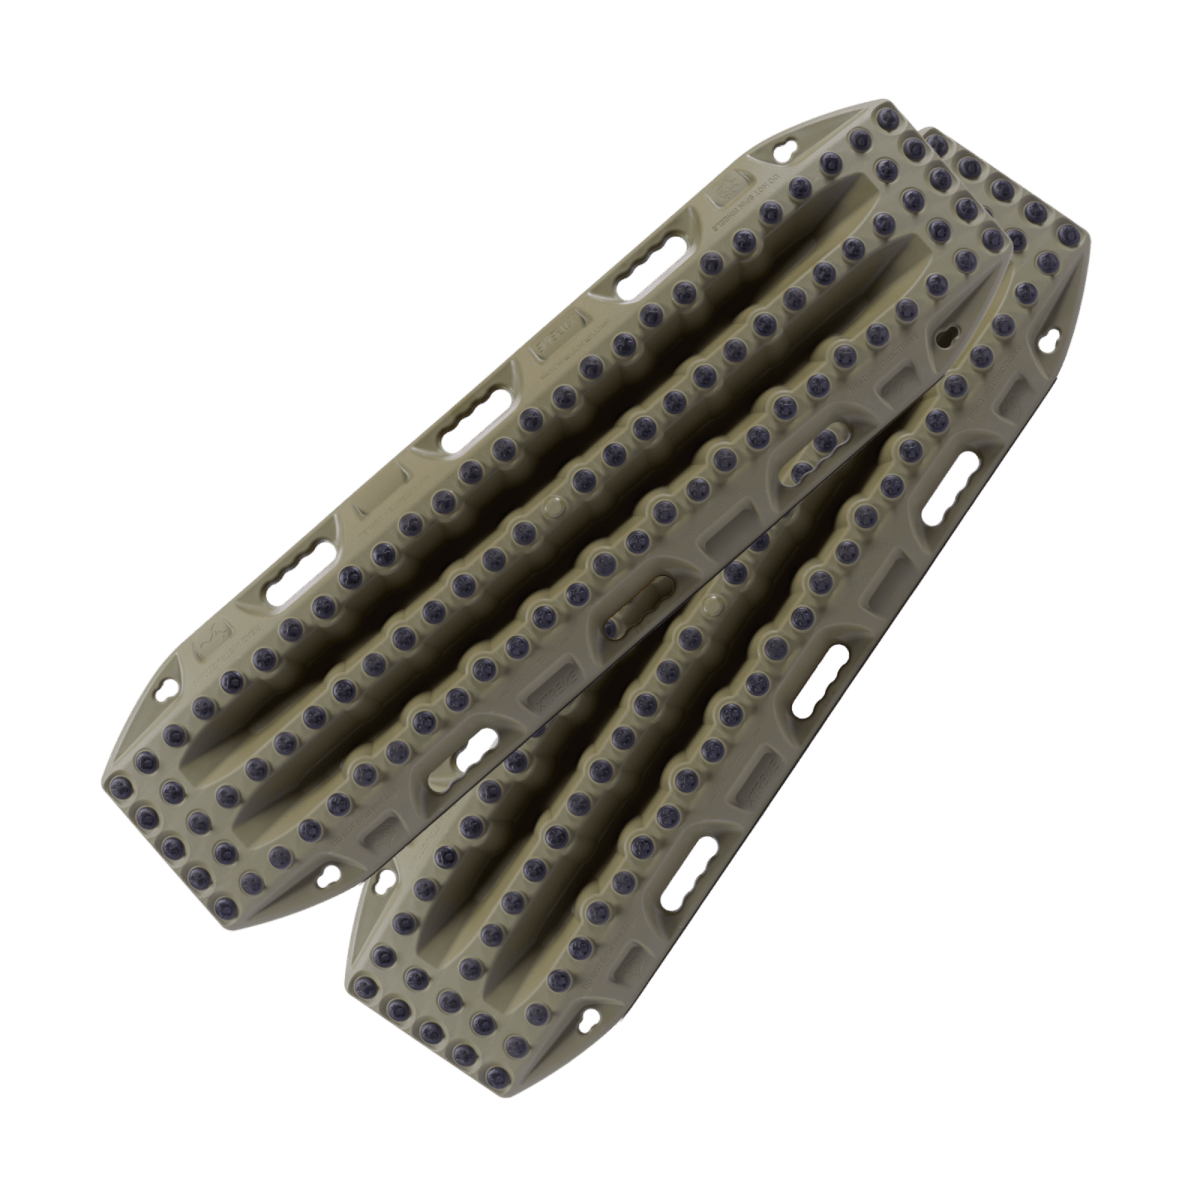 MAXTRAX Xtreme Olive Drab Recovery Boards - Overland Bound